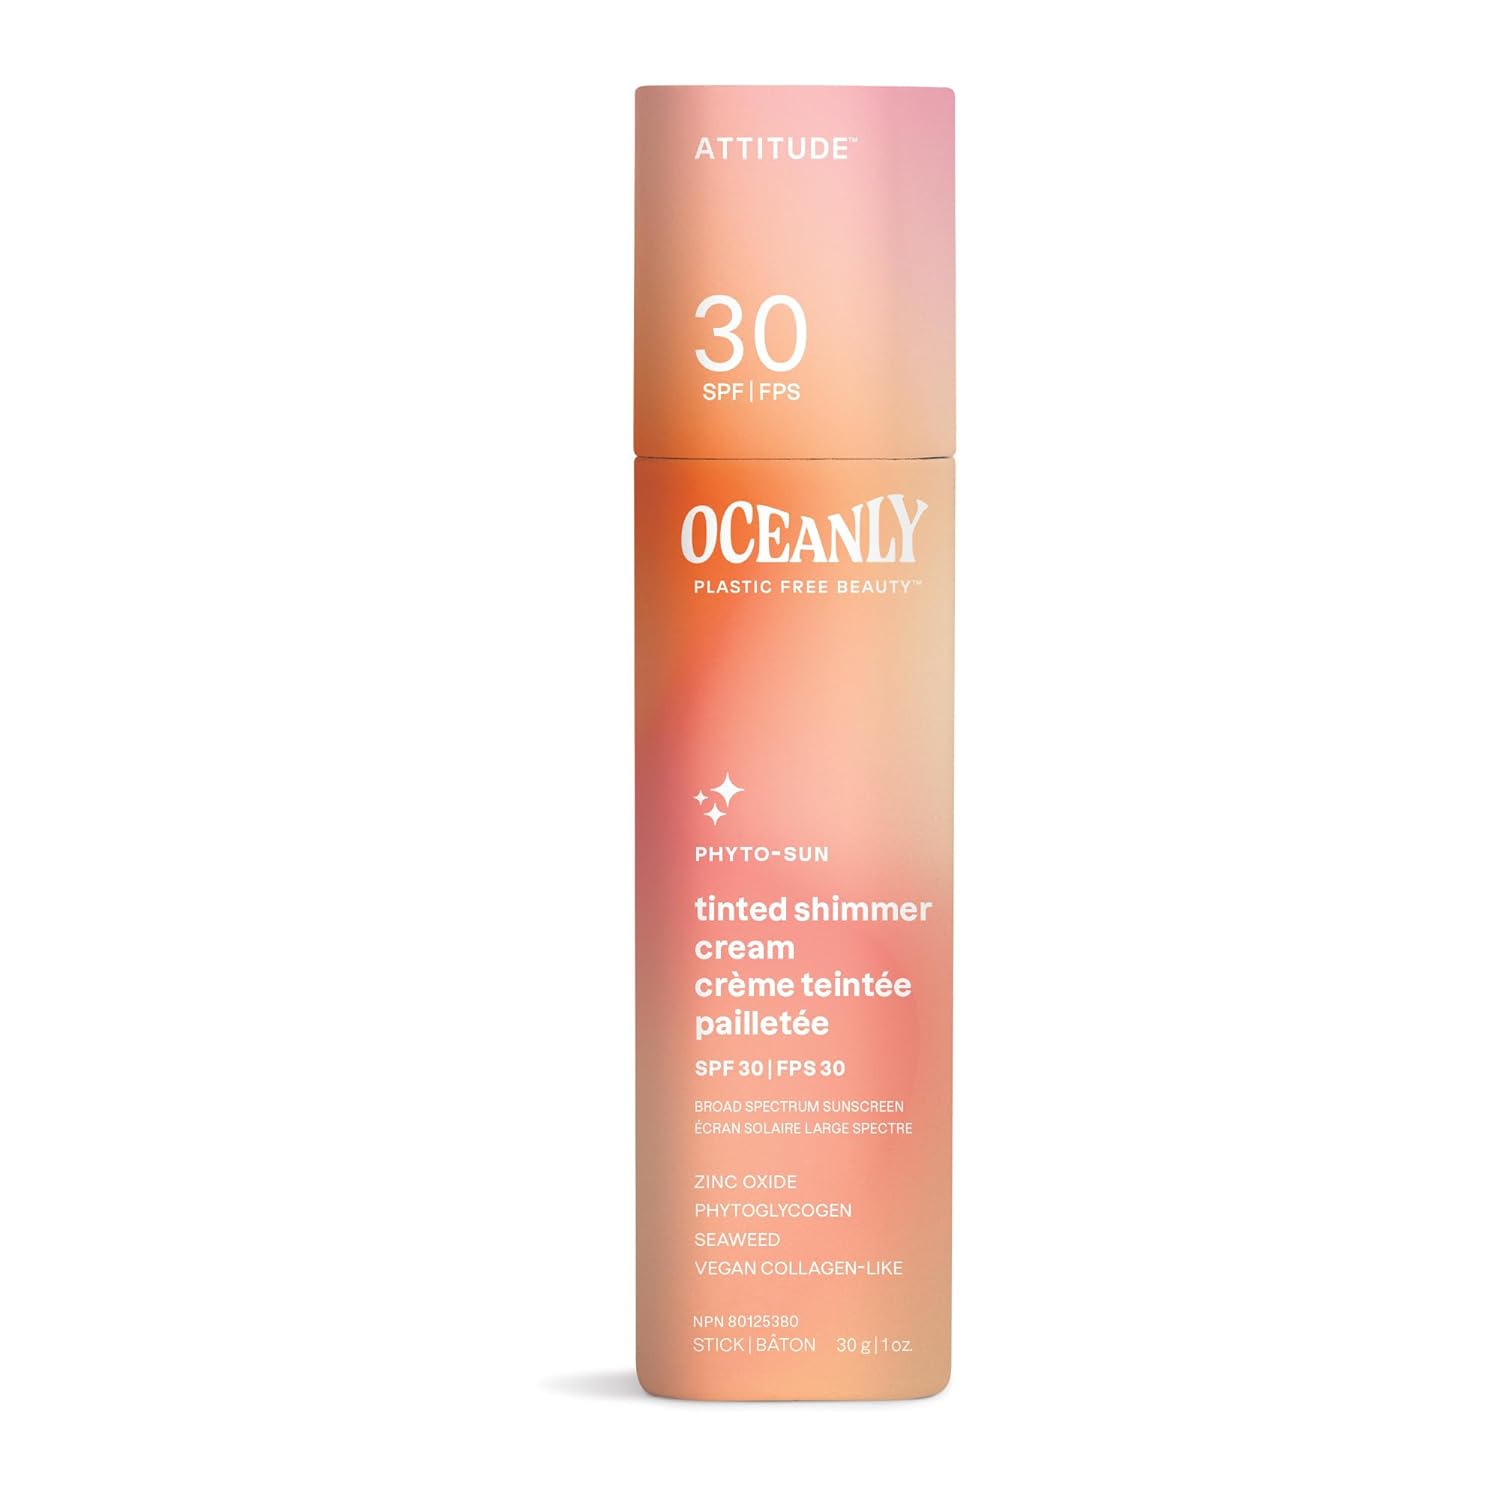 ATTITUDE Oceanly Tinted Shimmer Face Cream Stick with SPF 30, EWG Verified, Plastic-Free, Broad Spectrum UVA/UVB Protection with Zinc Oxide, Universal Tint, Unscented, 1 Ounce